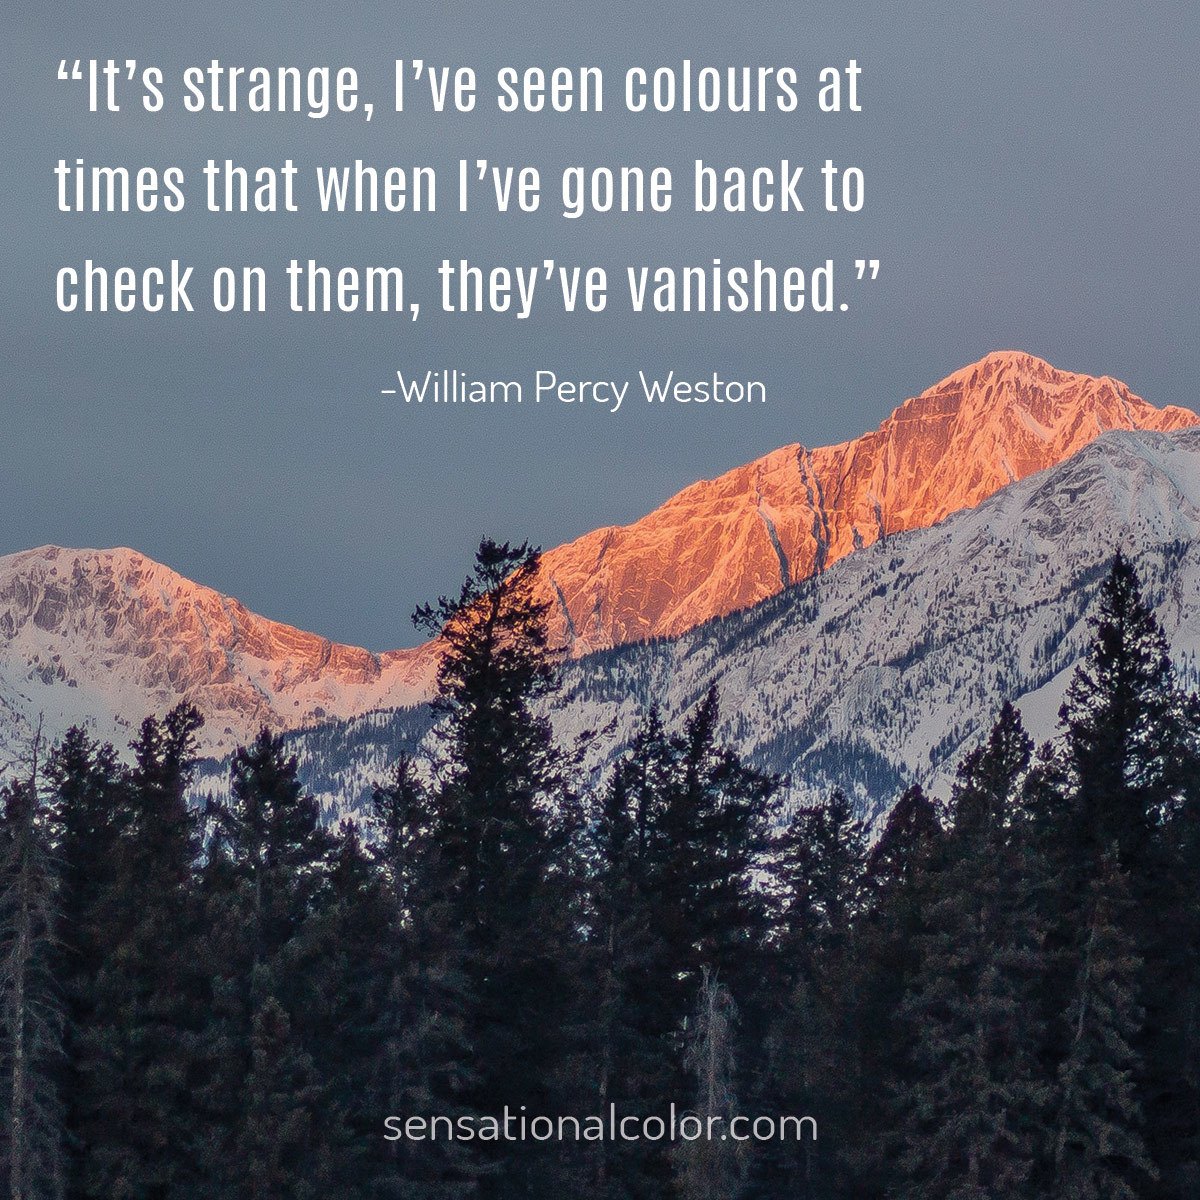 “It’s strange, I’ve seen colours at times that when I’ve gone back to check on them, they’ve vanished…” - William Percy Weston